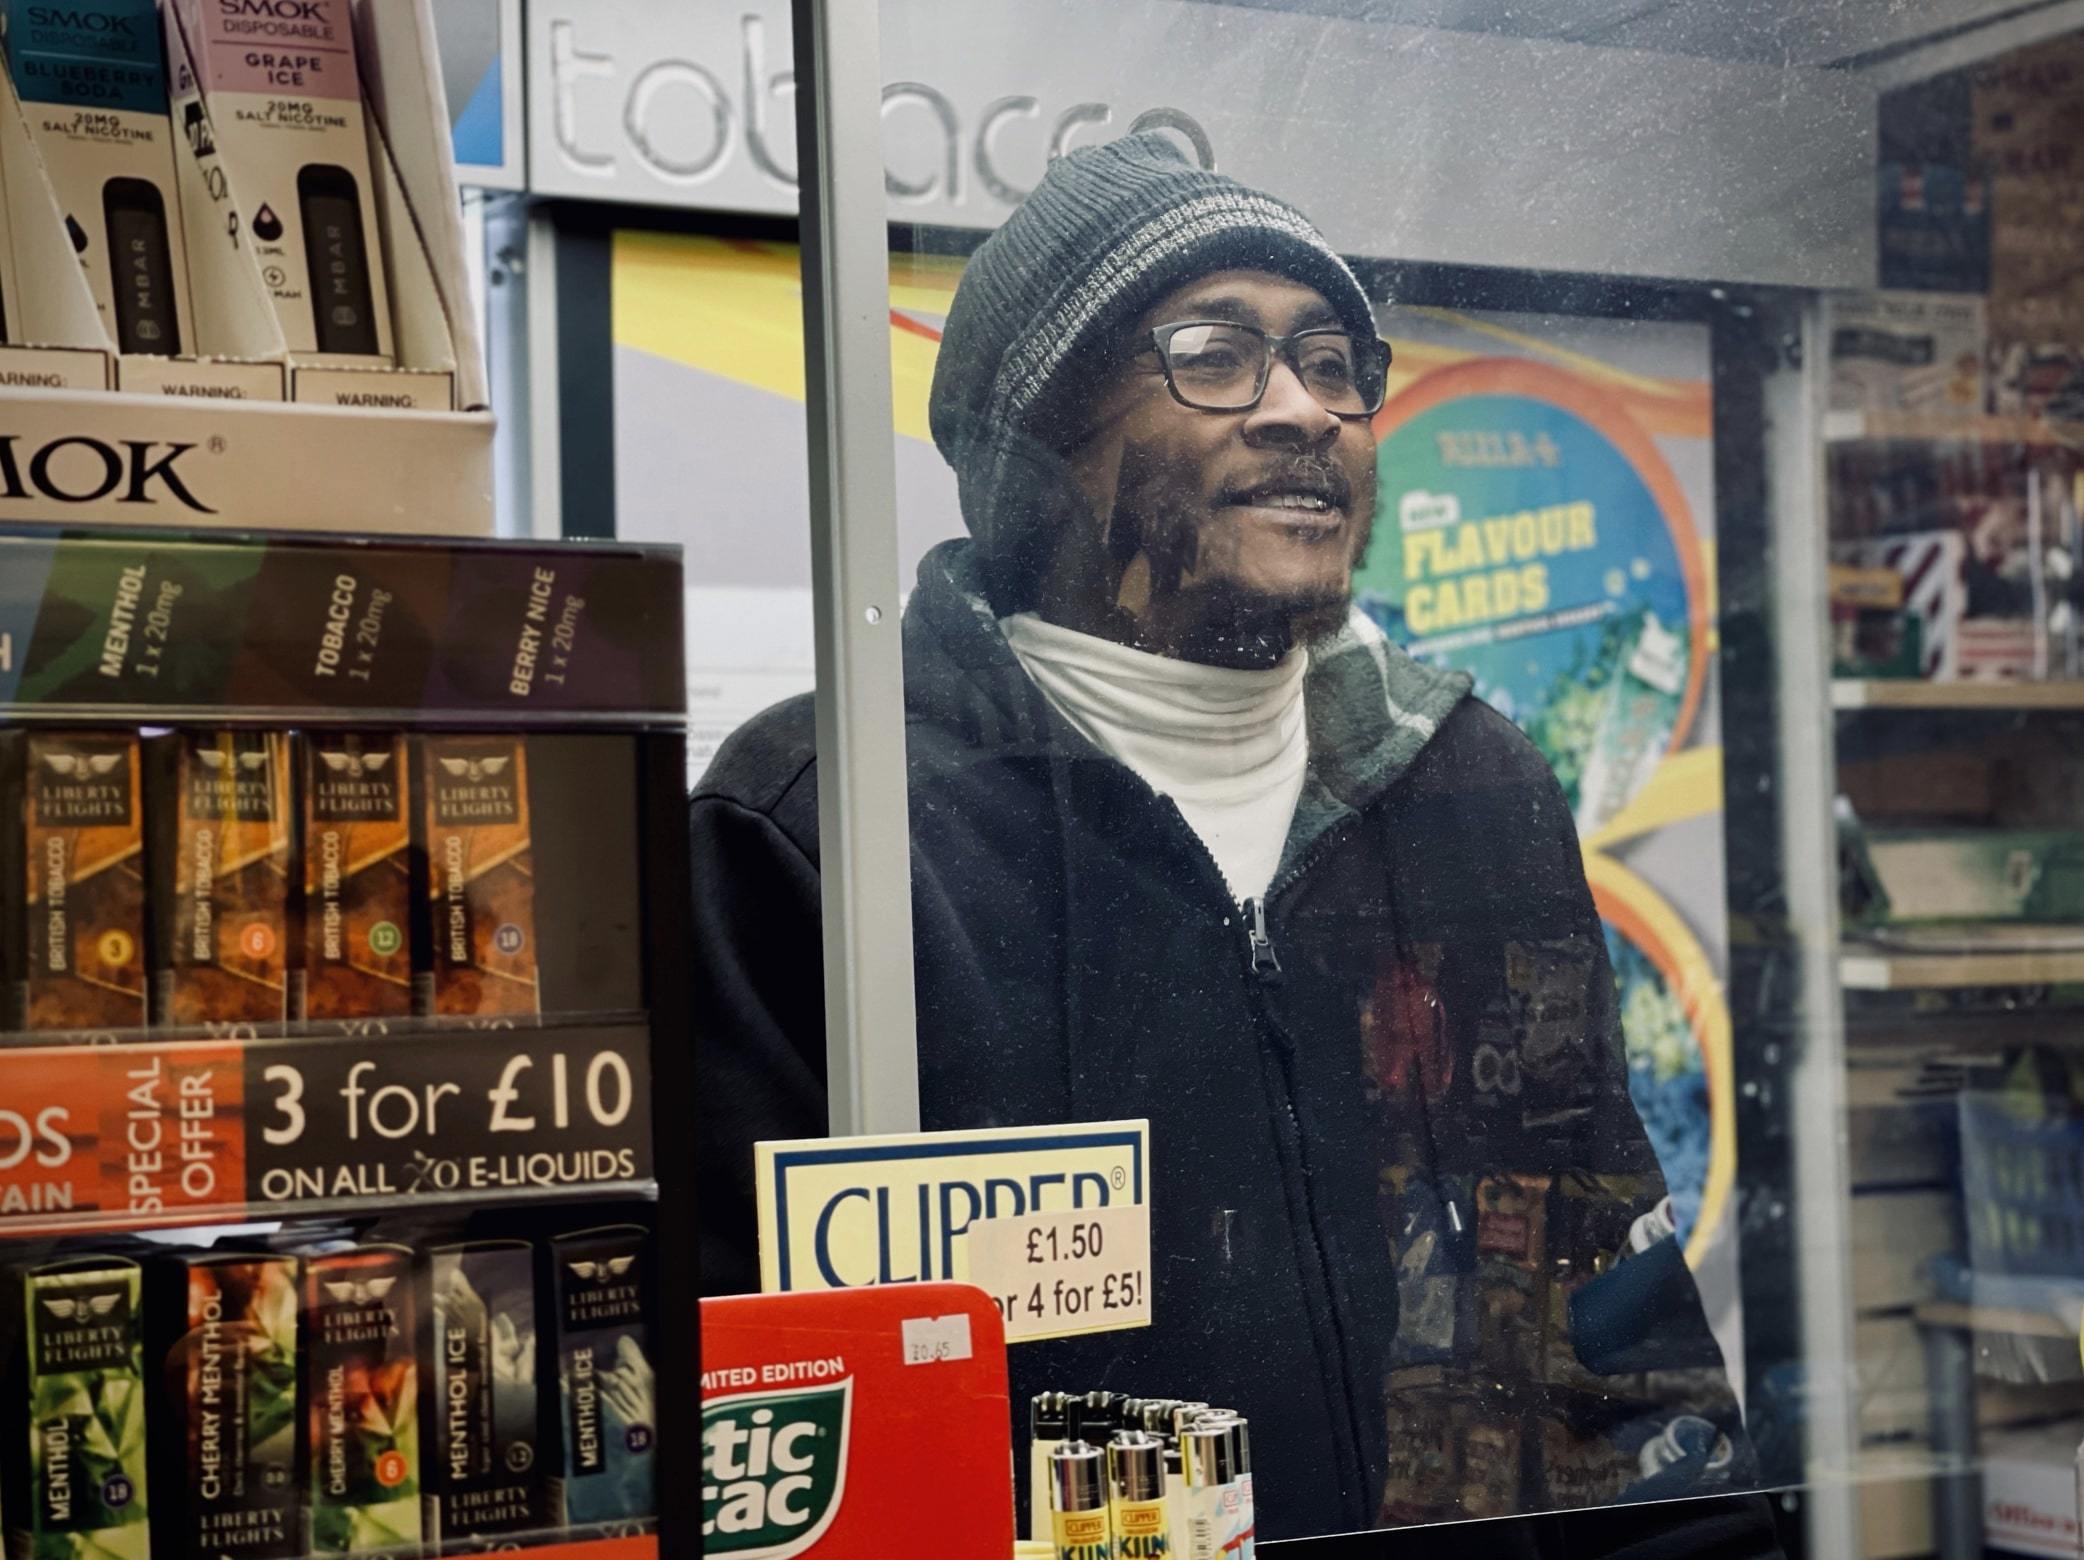 n Curtis starts at 6.30am to get the newspapers sorted for the day. They each need to be counted and organised. Curtis then moves onto the Kiosk upon shop opening. He jokes with his regular customers, many of whom are also early risers starting work.